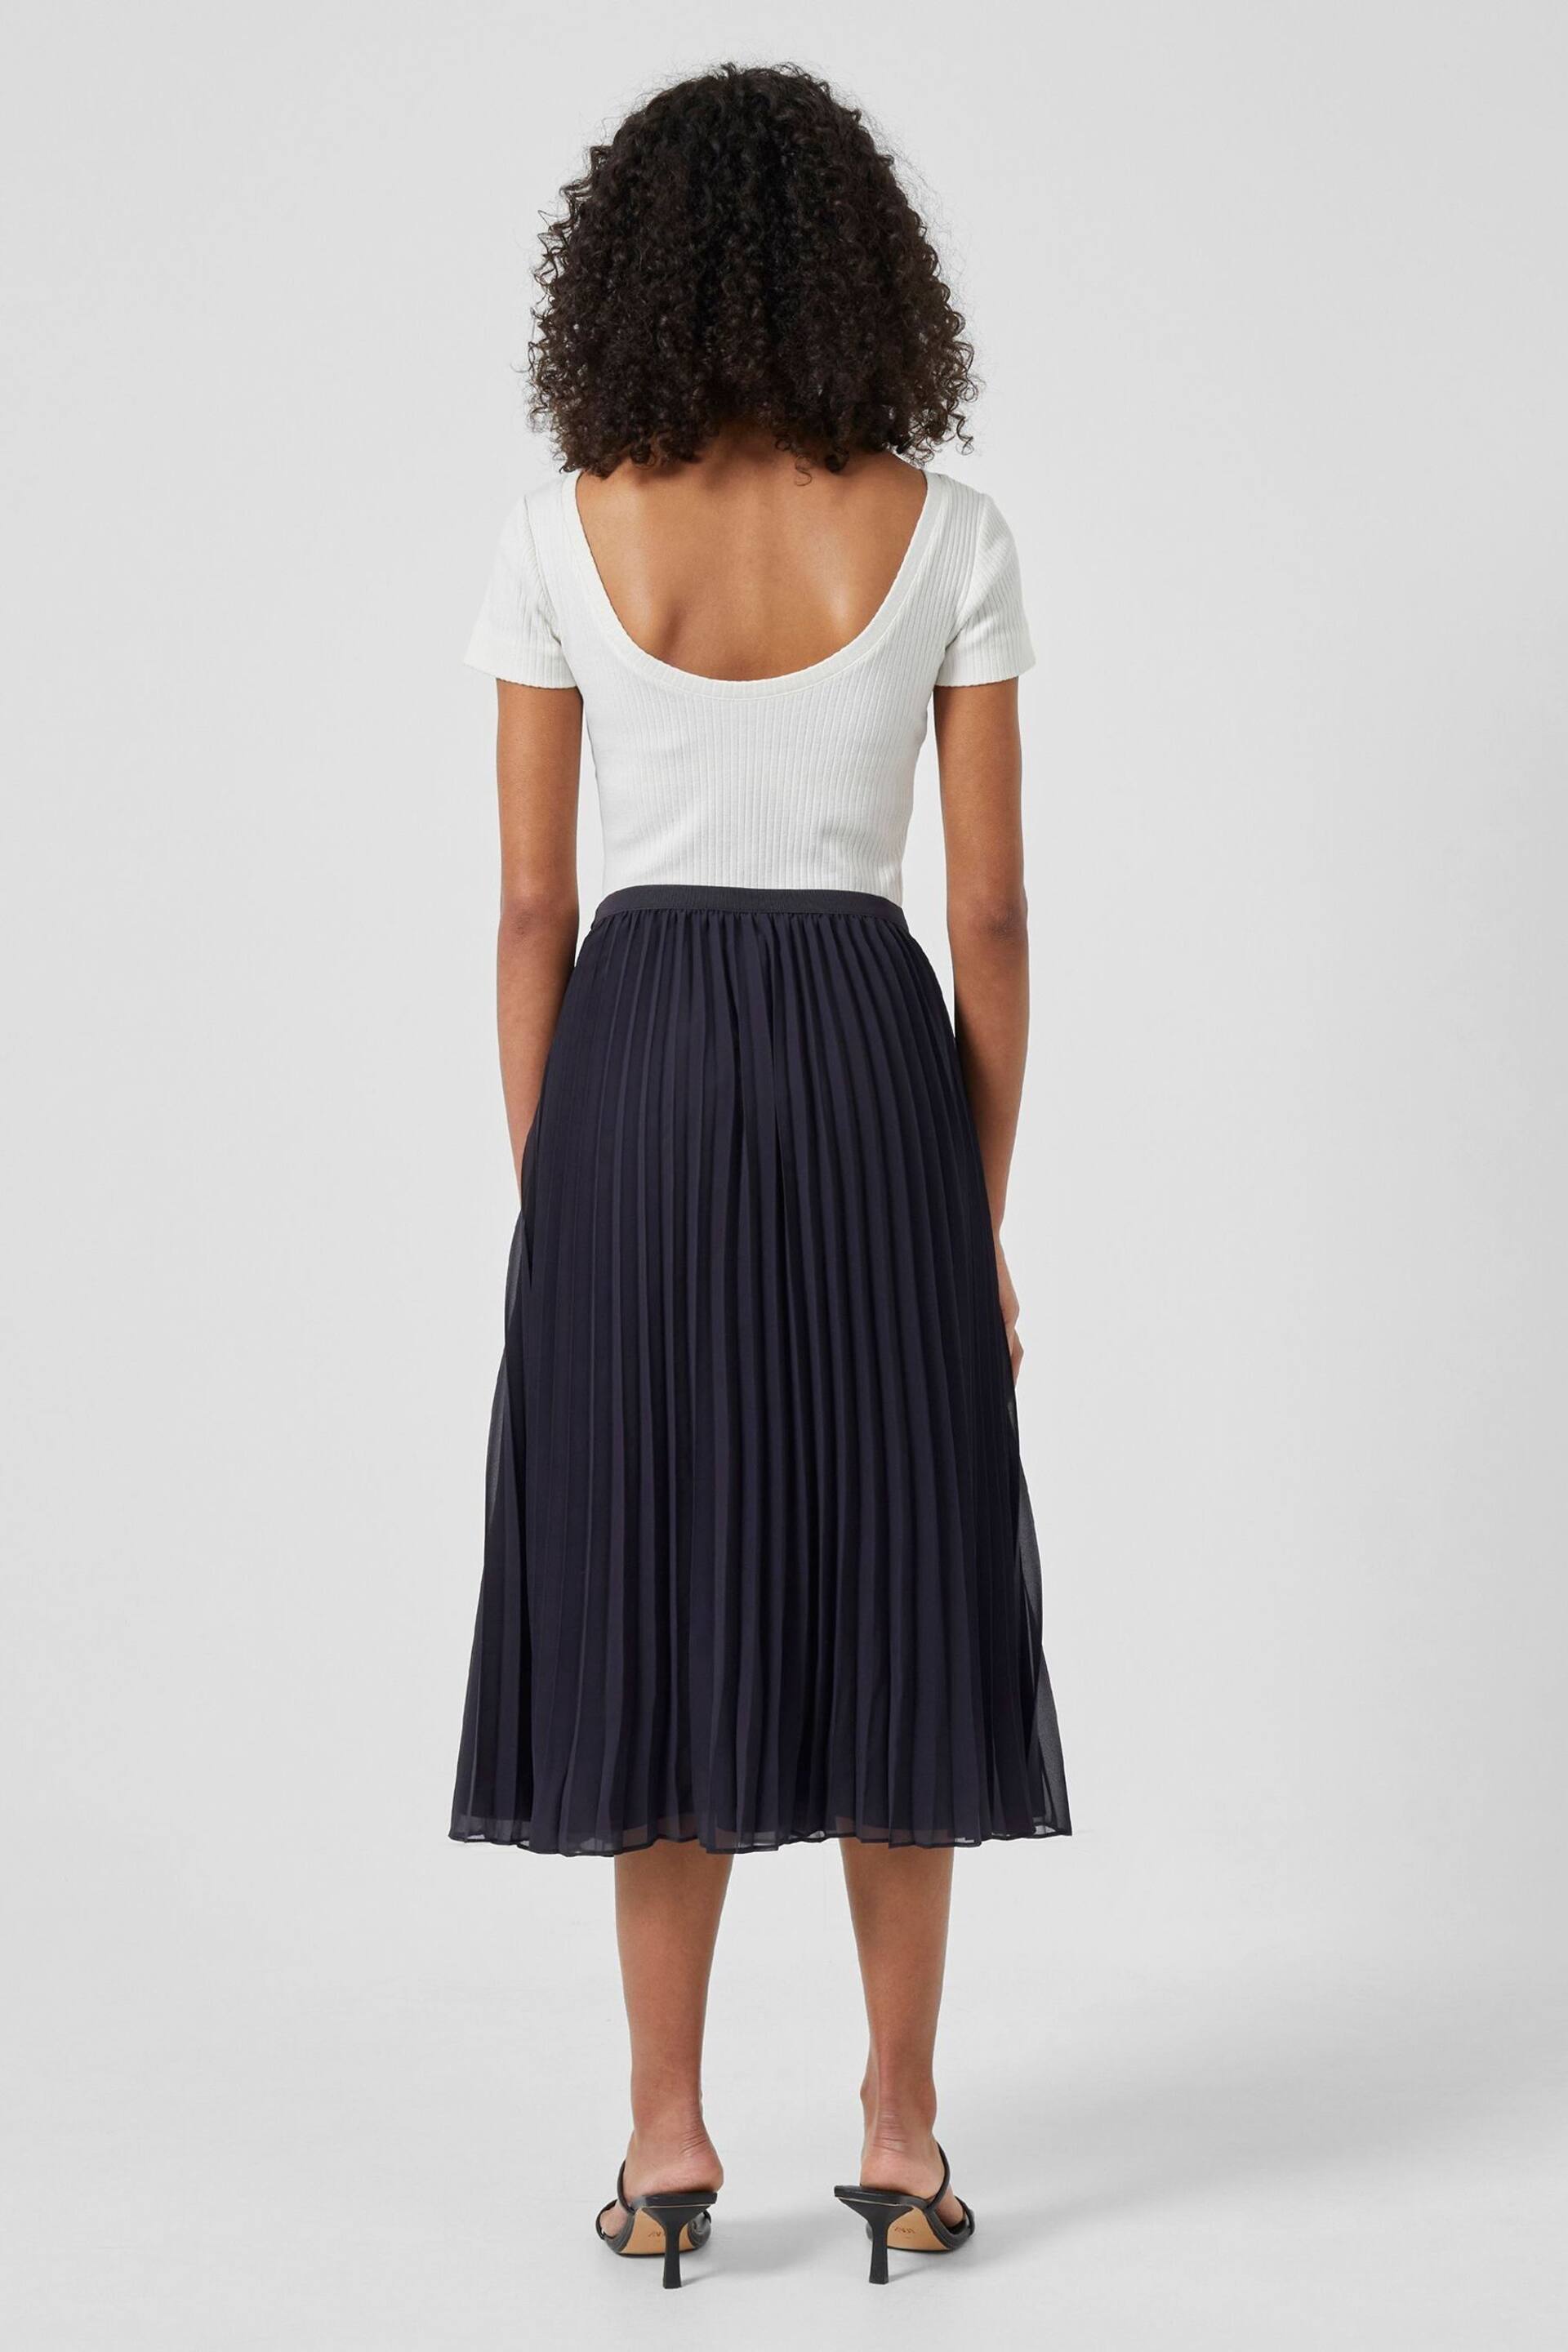 French Connection Pleated Solid Skirt - Image 3 of 4